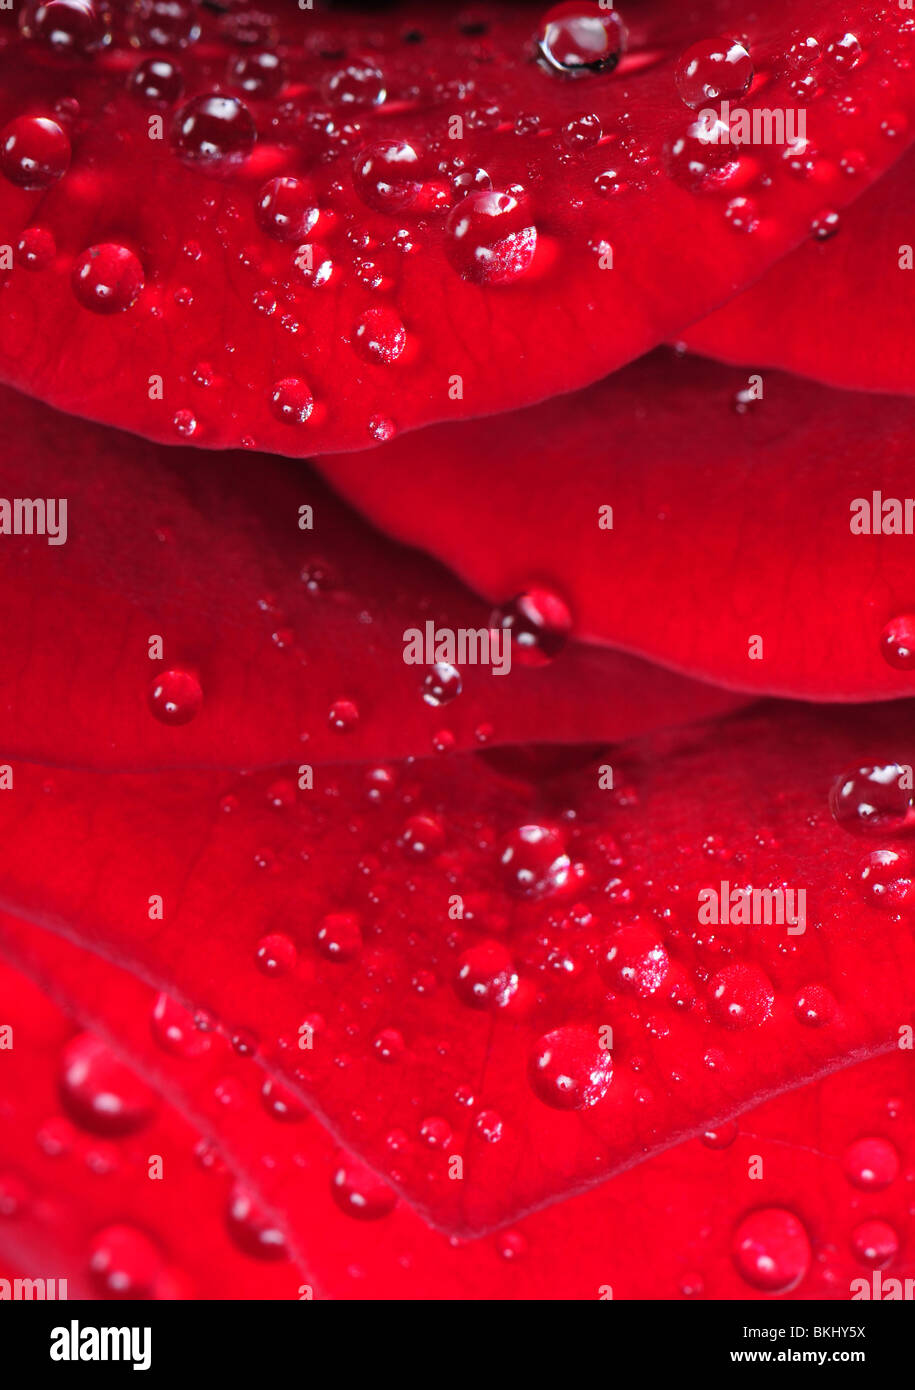 Water drops on the red rose petal for background or texture Stock Photo